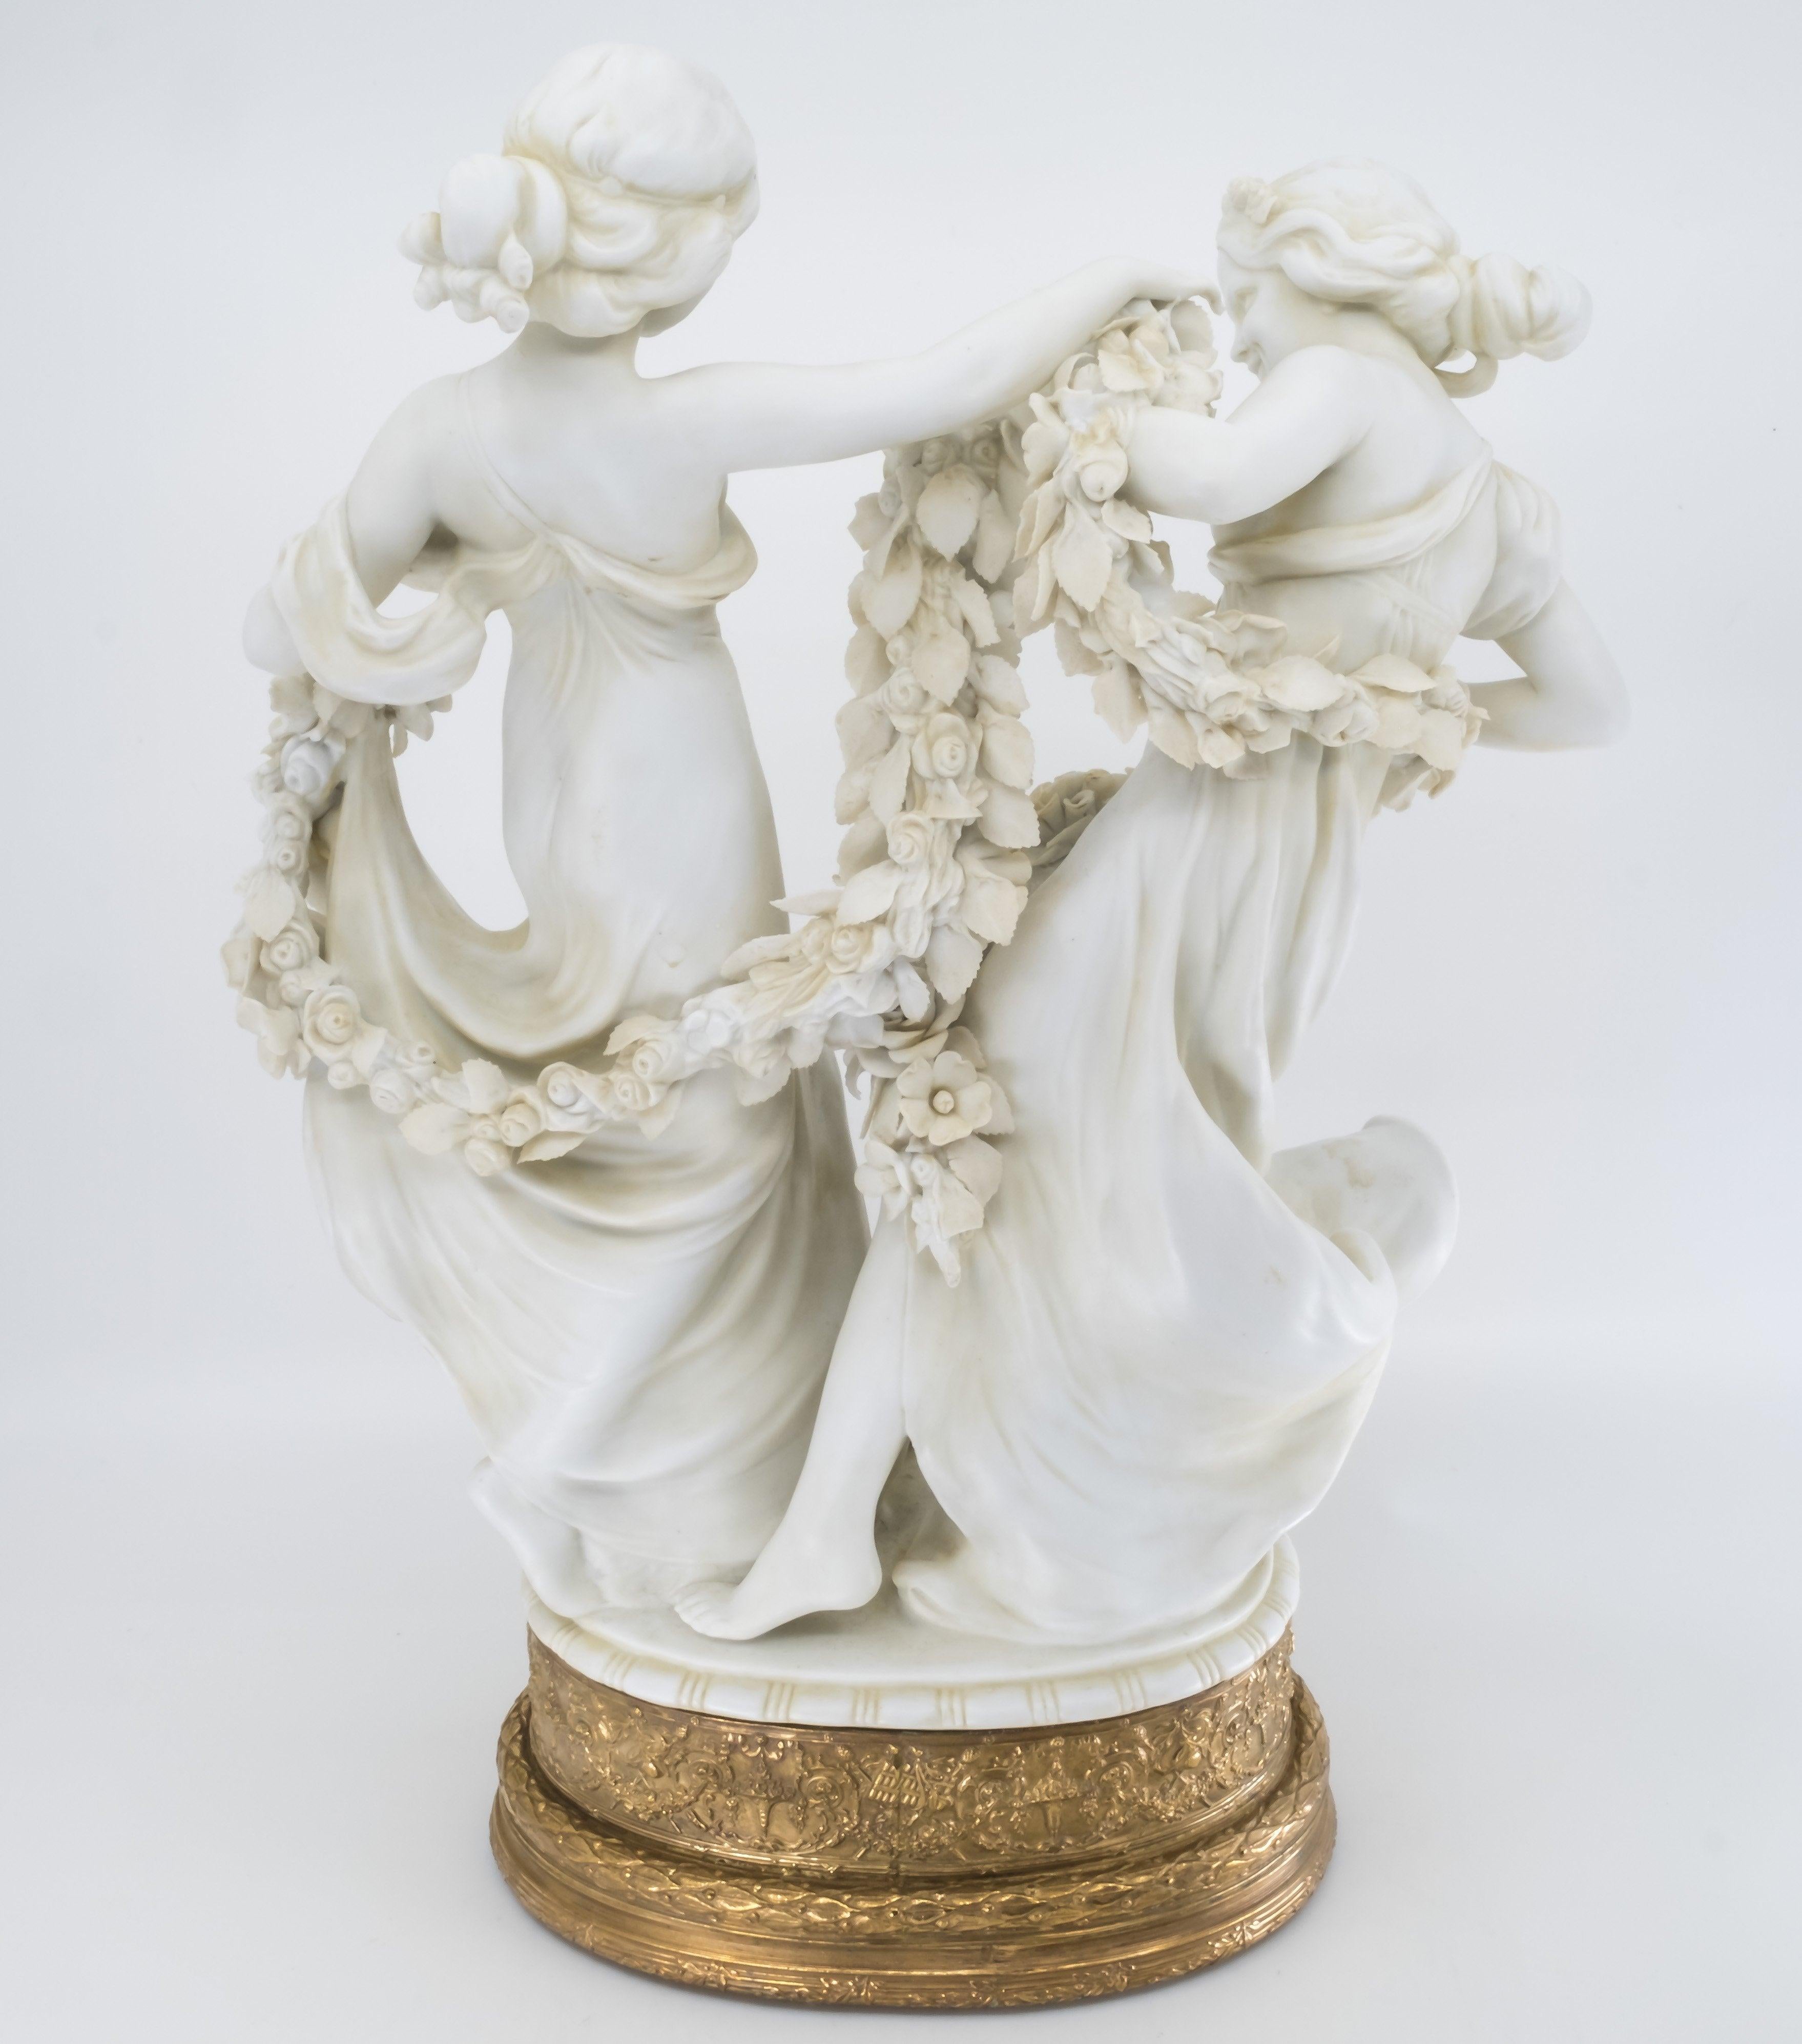 Joyful scene of two girls dancing holding flowers garlands,
The bronze stand beautiful work provide a solid base for the delicate captured movement of the 2 joyful girls
French Bisque, 19th century
Marked.

Shipping included 
Free and fast